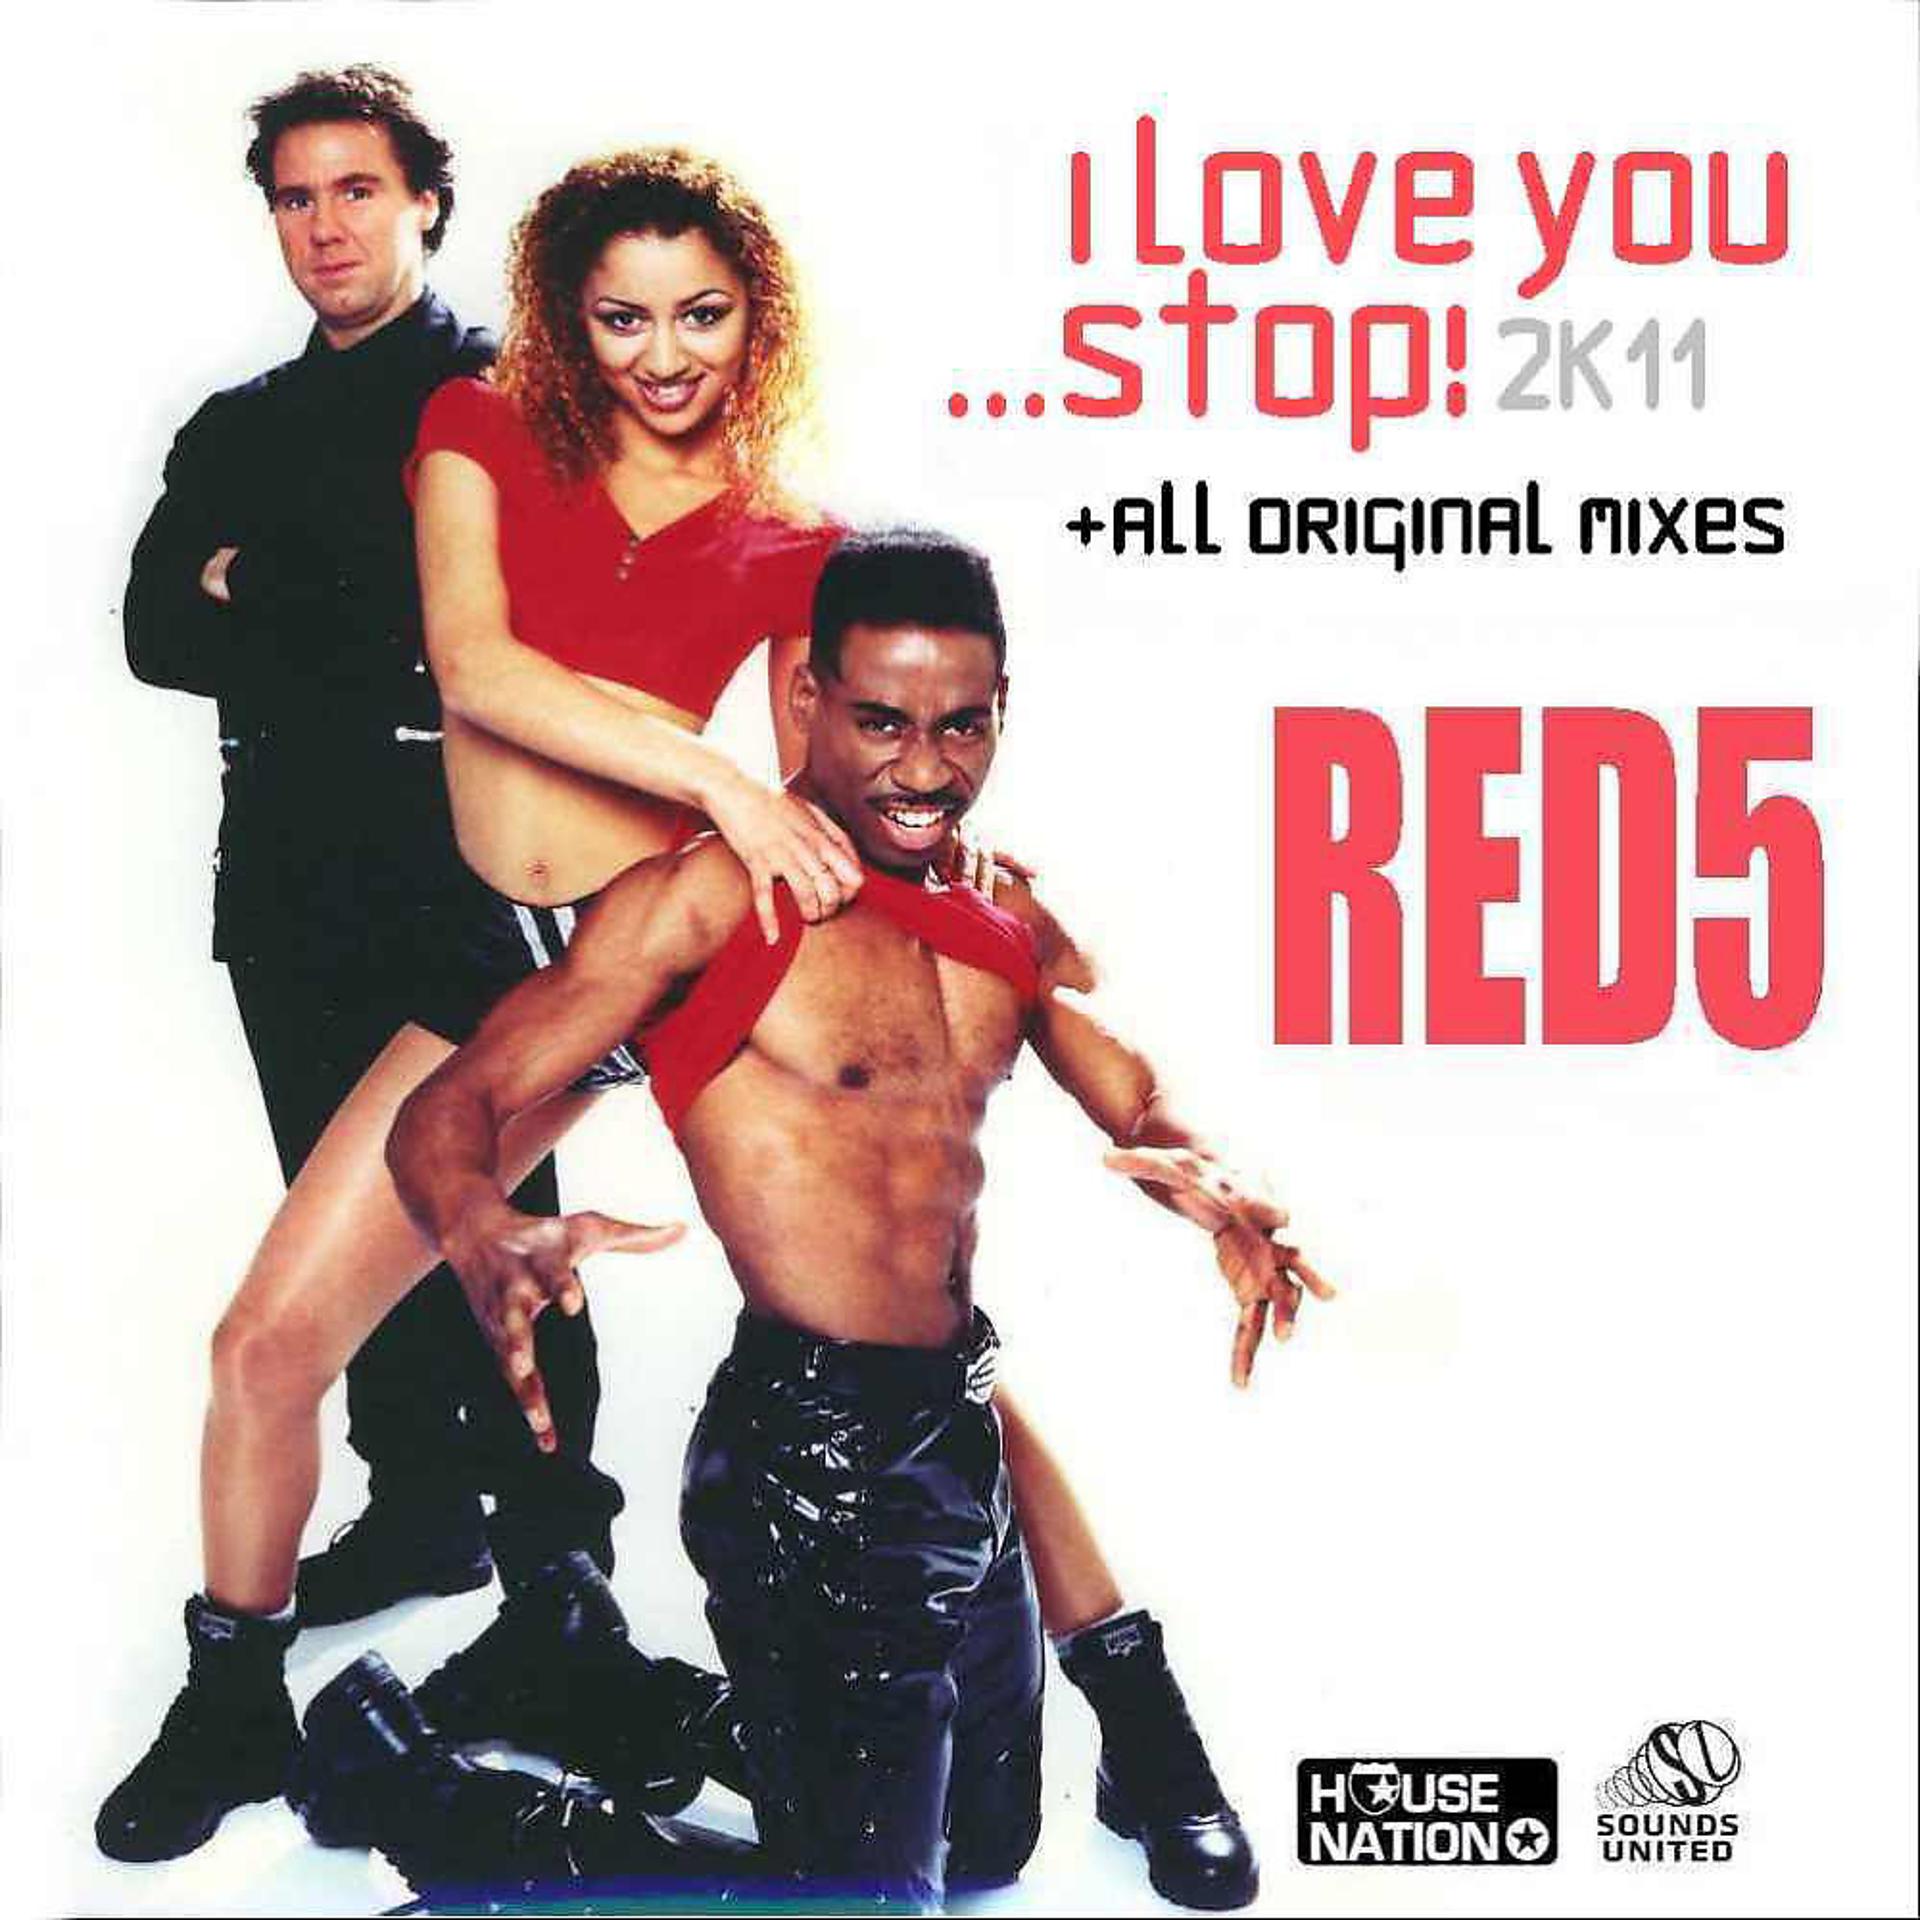 Включи red 3. Red 5 группа. Red 5 - Forces. Red 5 i Love you stop. Red 5 - da Beat goes.